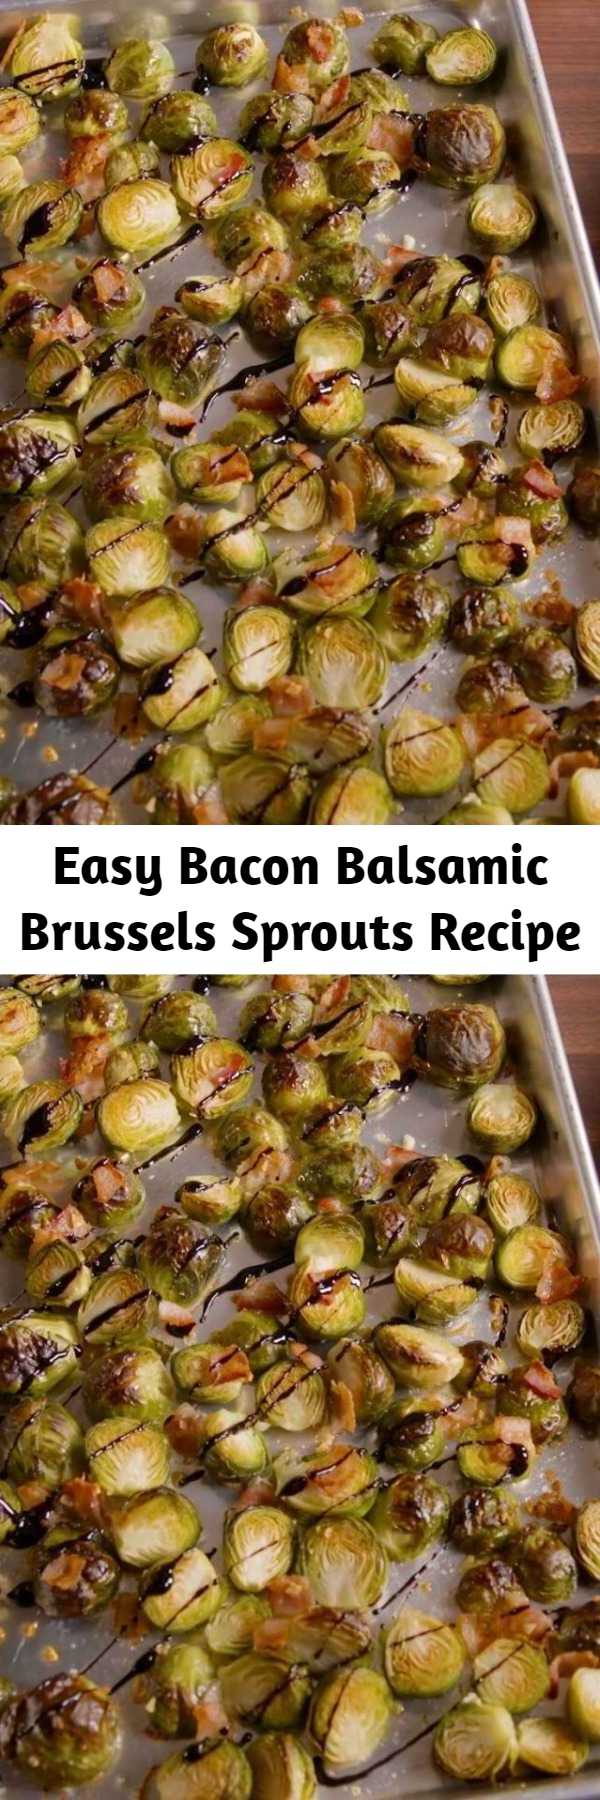 Easy Bacon Balsamic Brussels Sprouts Recipe - These Brussels sprouts are easy enough to make on a weeknight but fancy enough to serve at a dinner party. Instead of roasting the sprouts with balsamic vinegar (which would make them soggy and mushy) we make a simple balsamic glaze to garnish them with. #easy #recipe #Brusselsprouts #brussels #bacon #Balsamic #glaze #roasted #vegetarian #crispy #honey